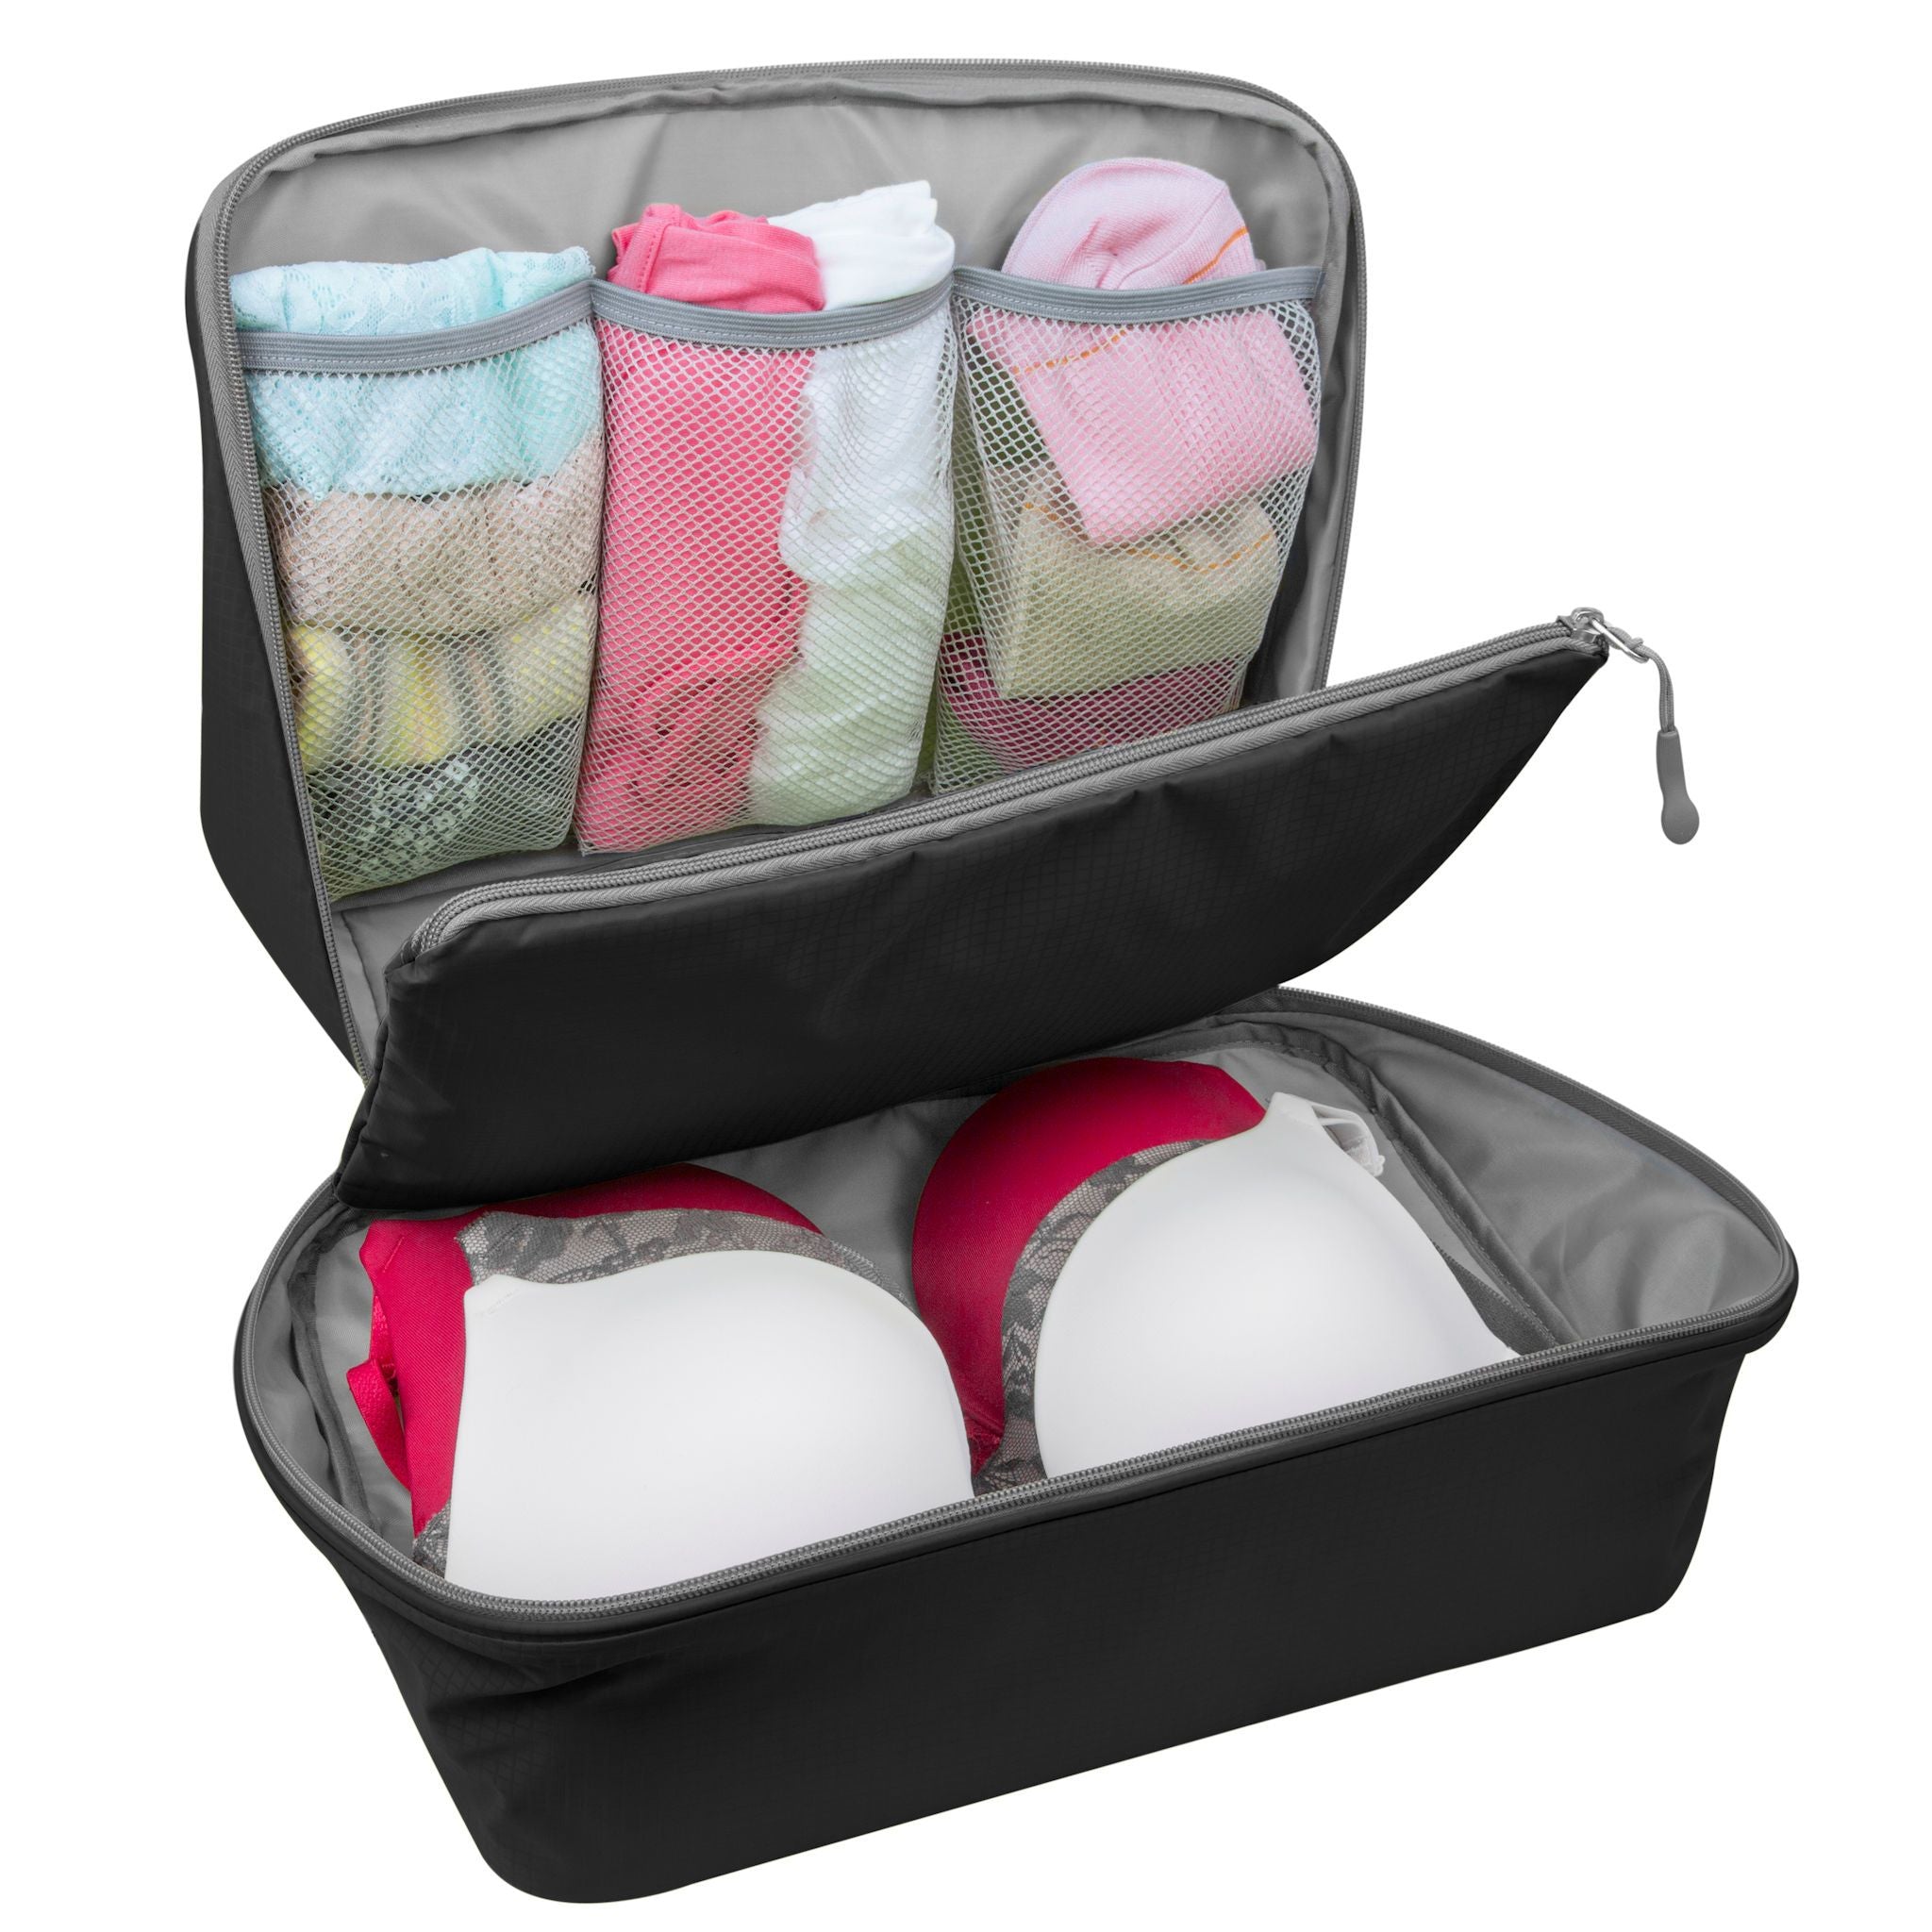 Travelon Compression Packing Bags - Set of 2